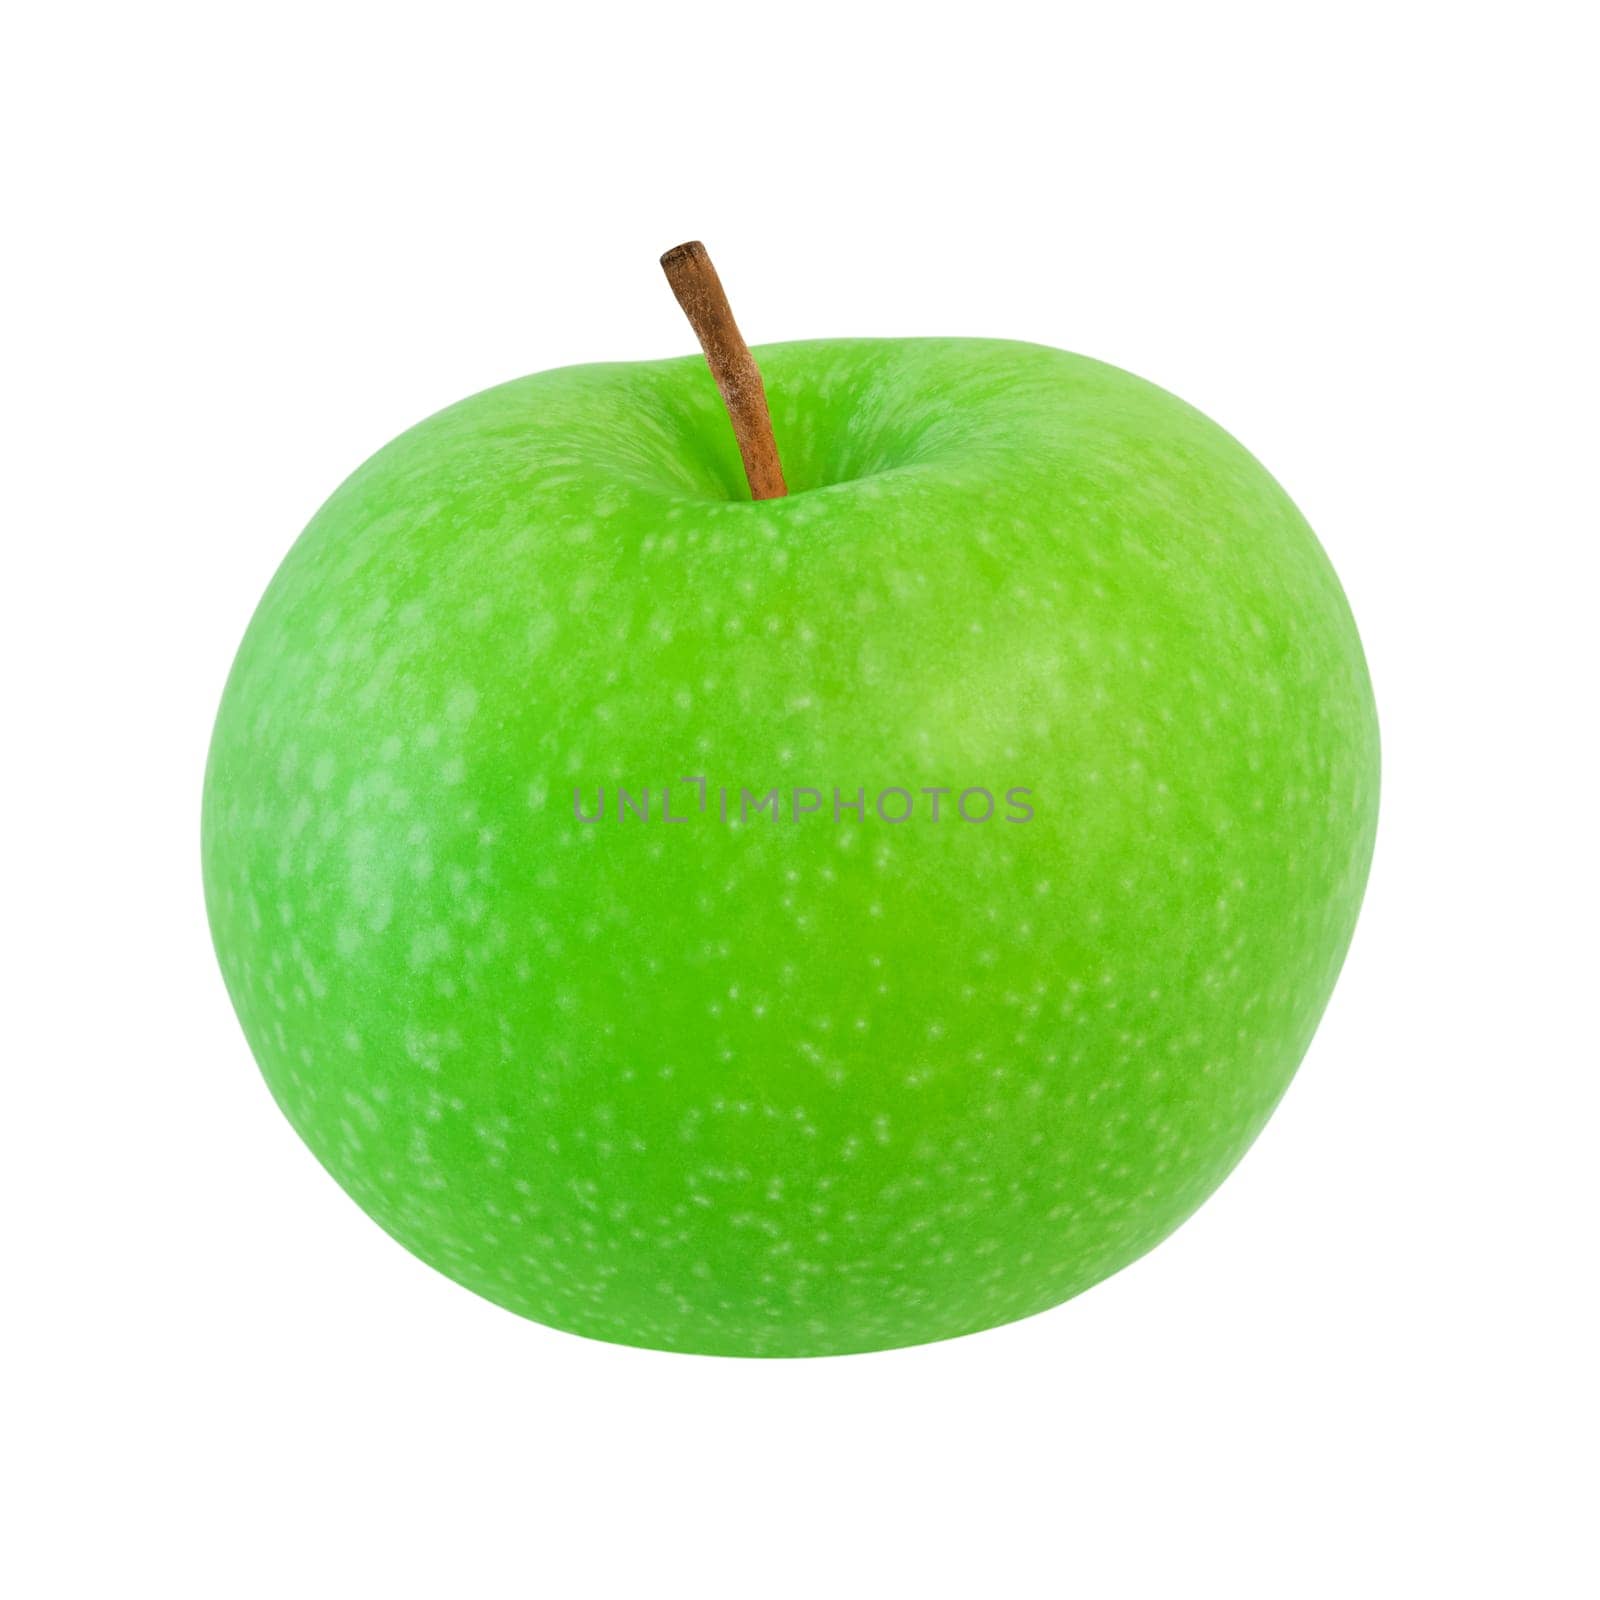 Green apple isolated on a white background. Stock photography by anna_artist